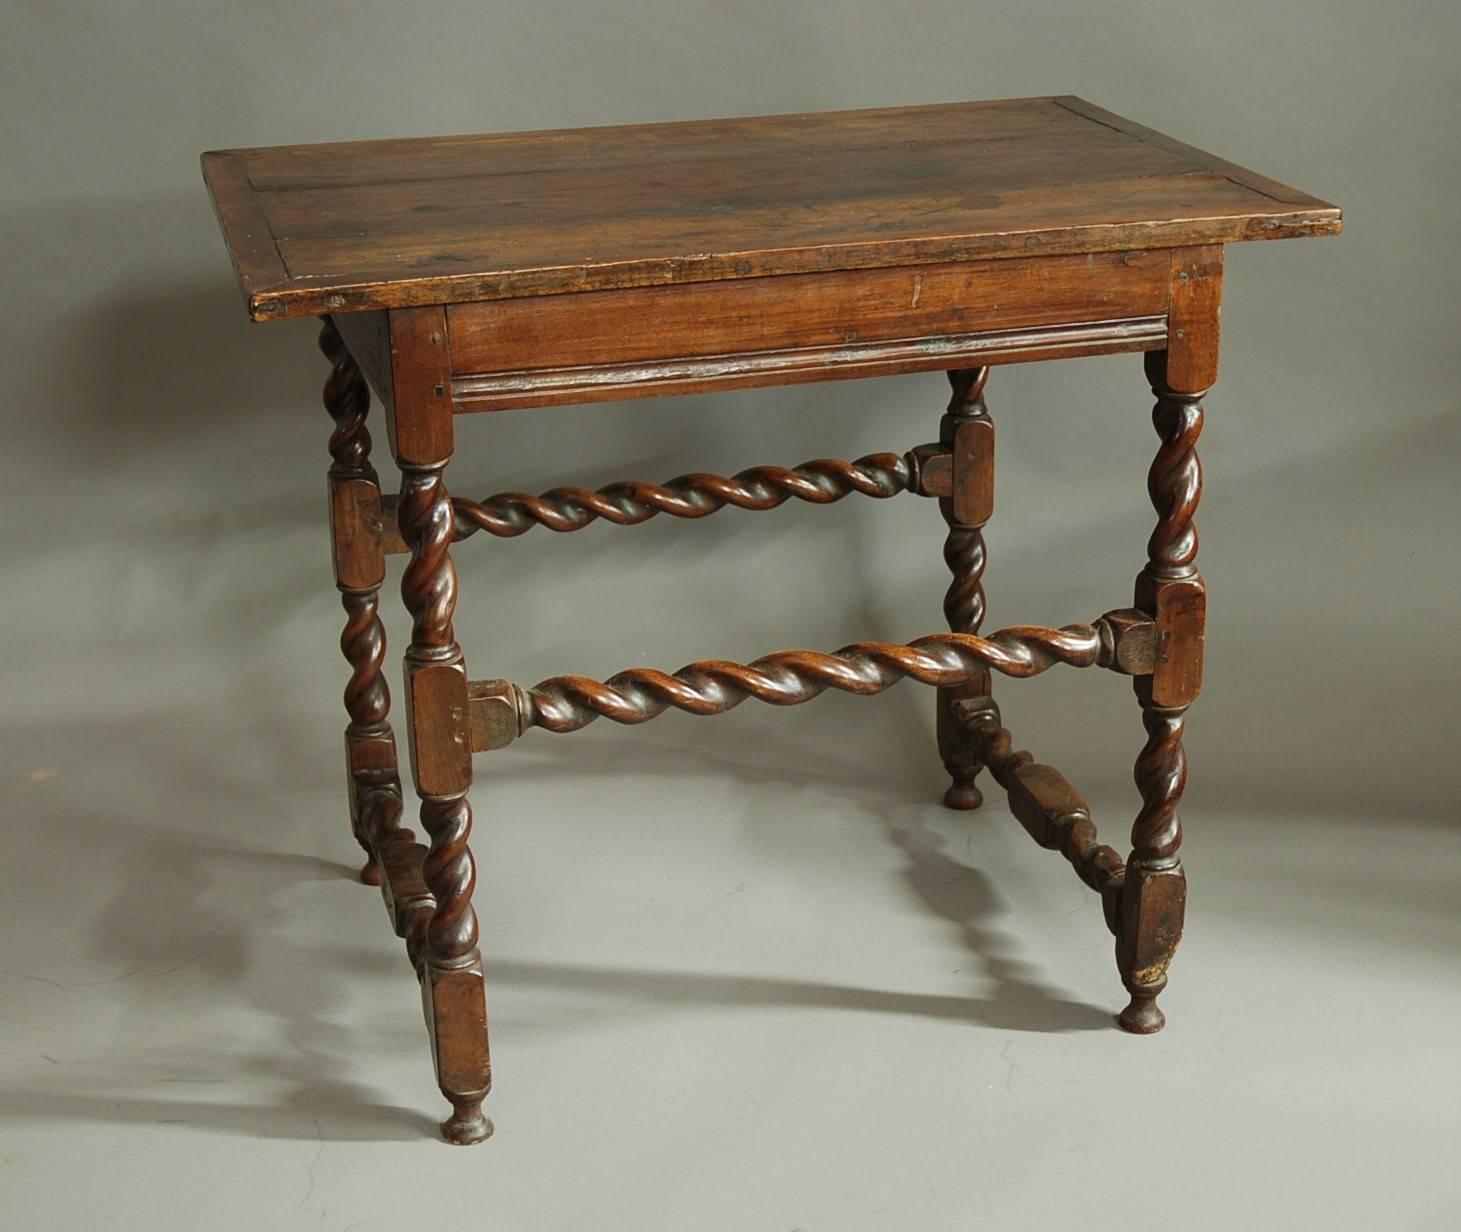 A late 17th century walnut table of good quality and good patina.

The table consists of a three plank walnut top with a mitered walnut edge.
 
This leads down to moulded rails, one of these has been replaced over the years with an oak